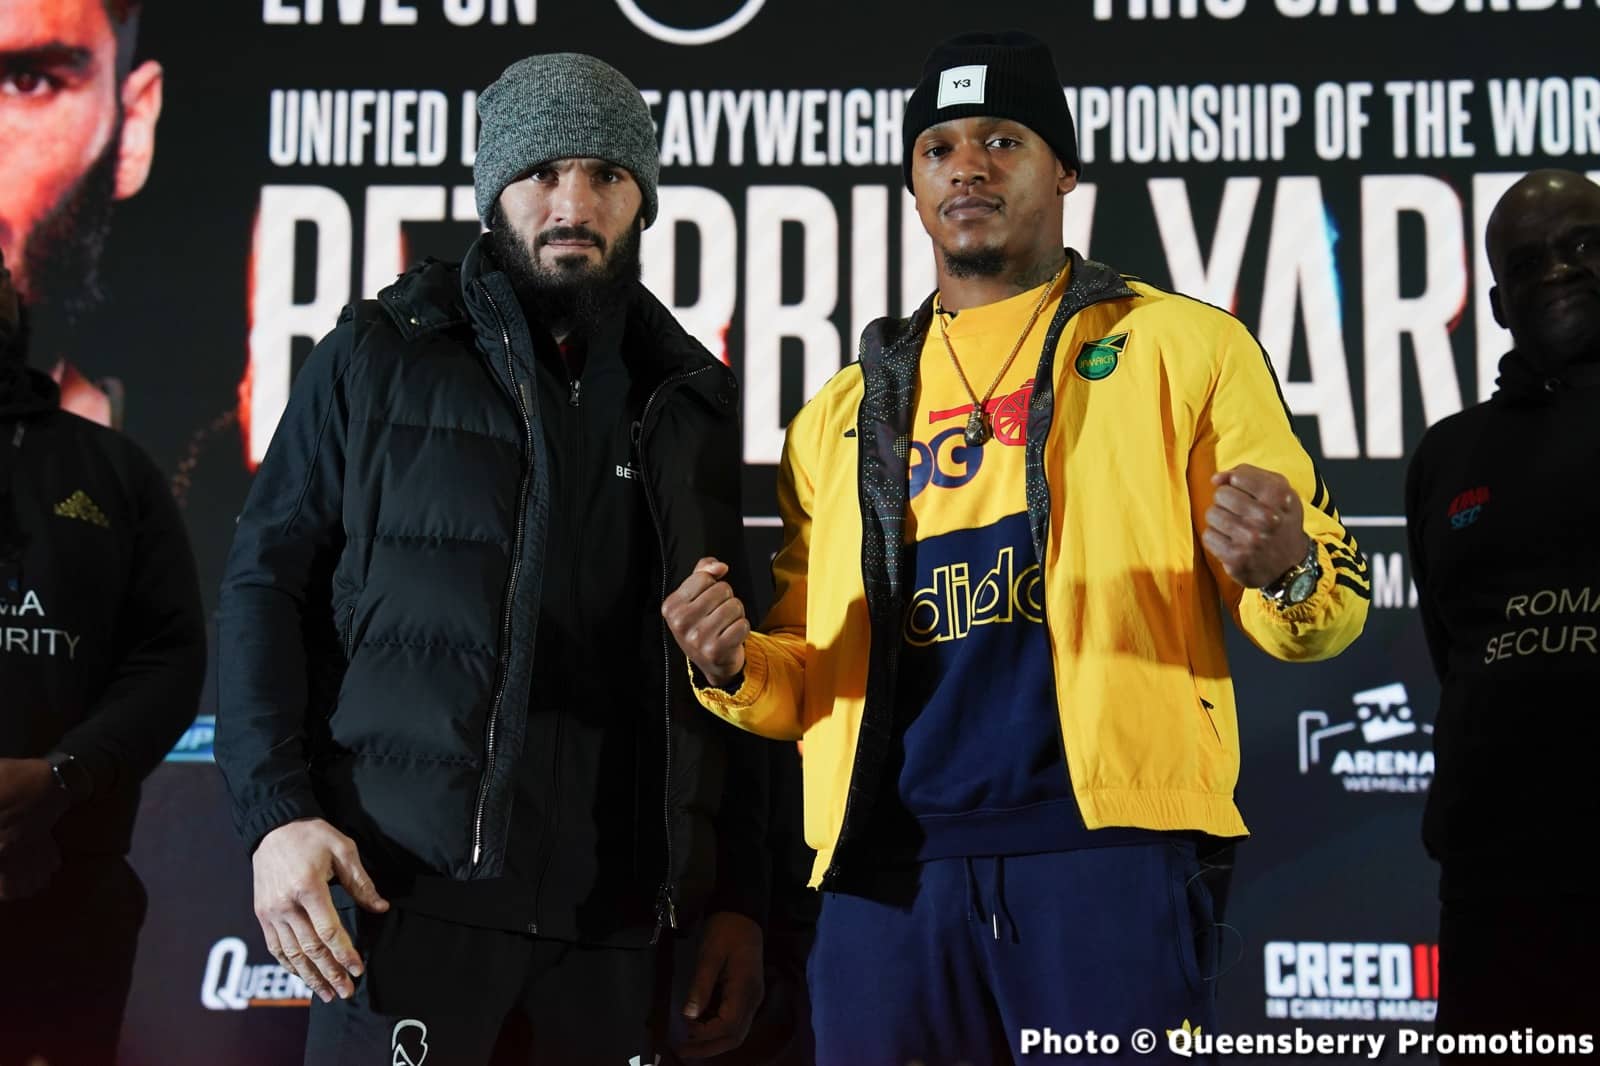 Image: Artur Beterbiev vs. Anthony Yarde - final press conference for Saturday's clash in London, England